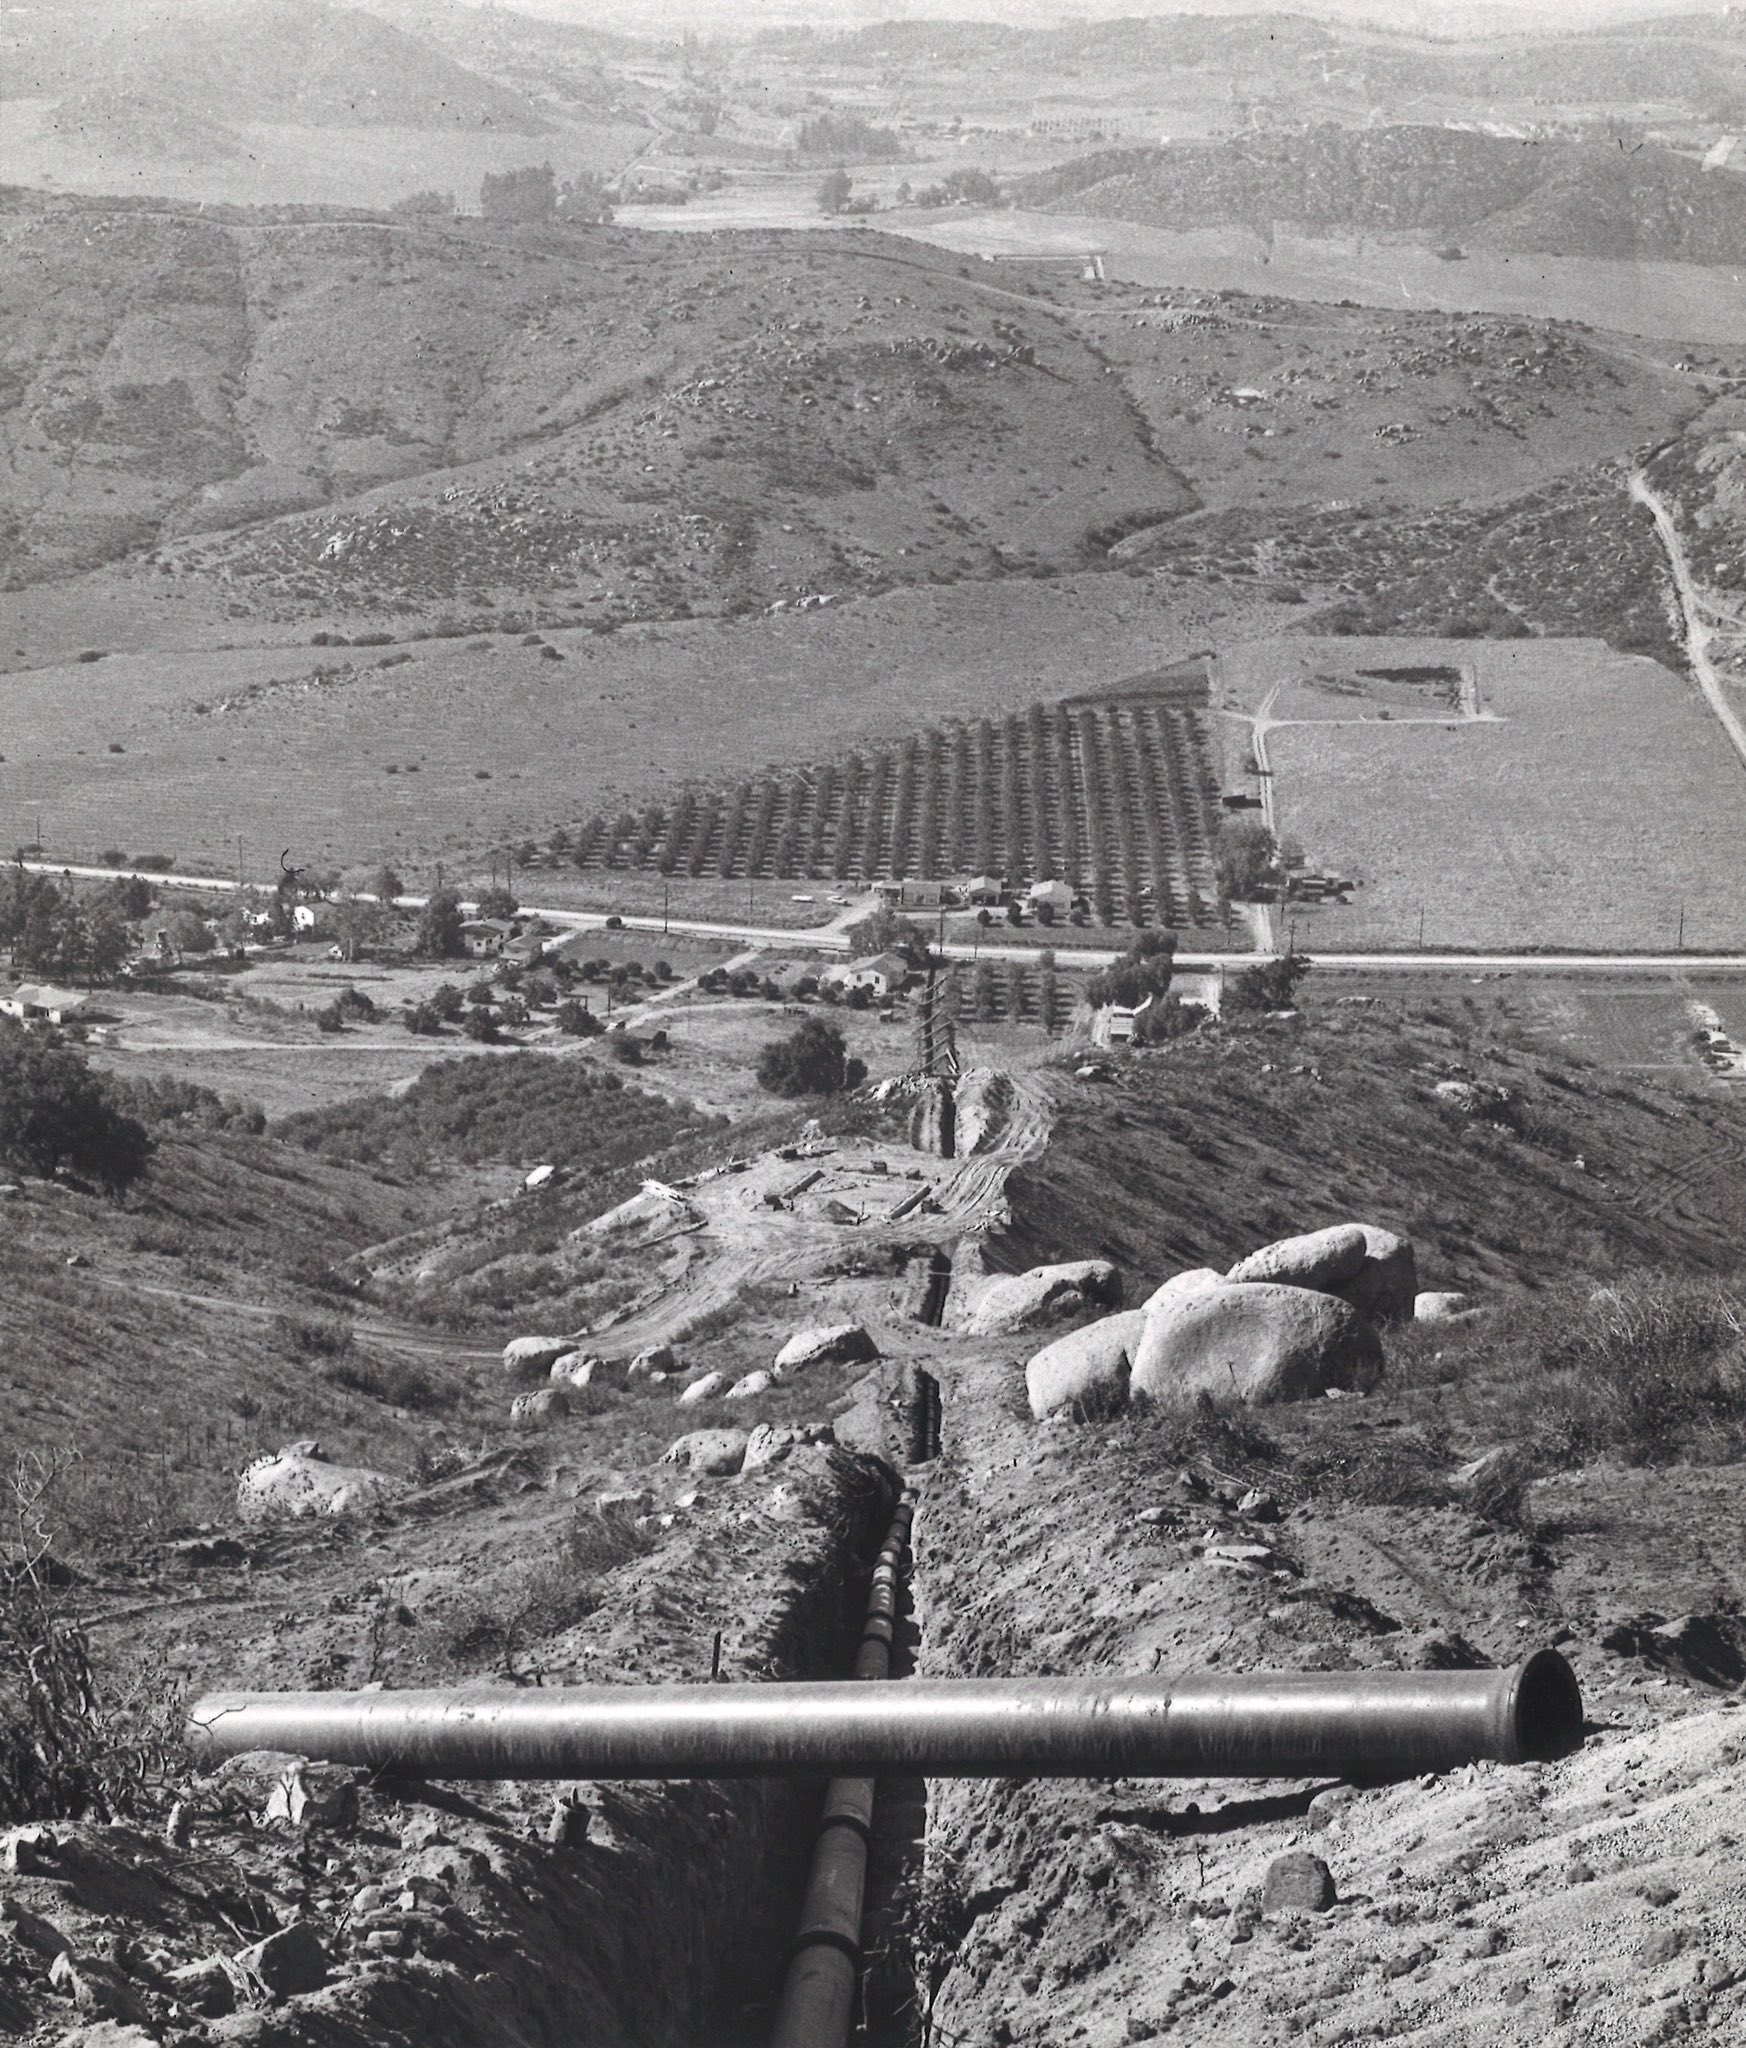 Pipeline from potable water reservoir to pumping station in Steele Canyon.